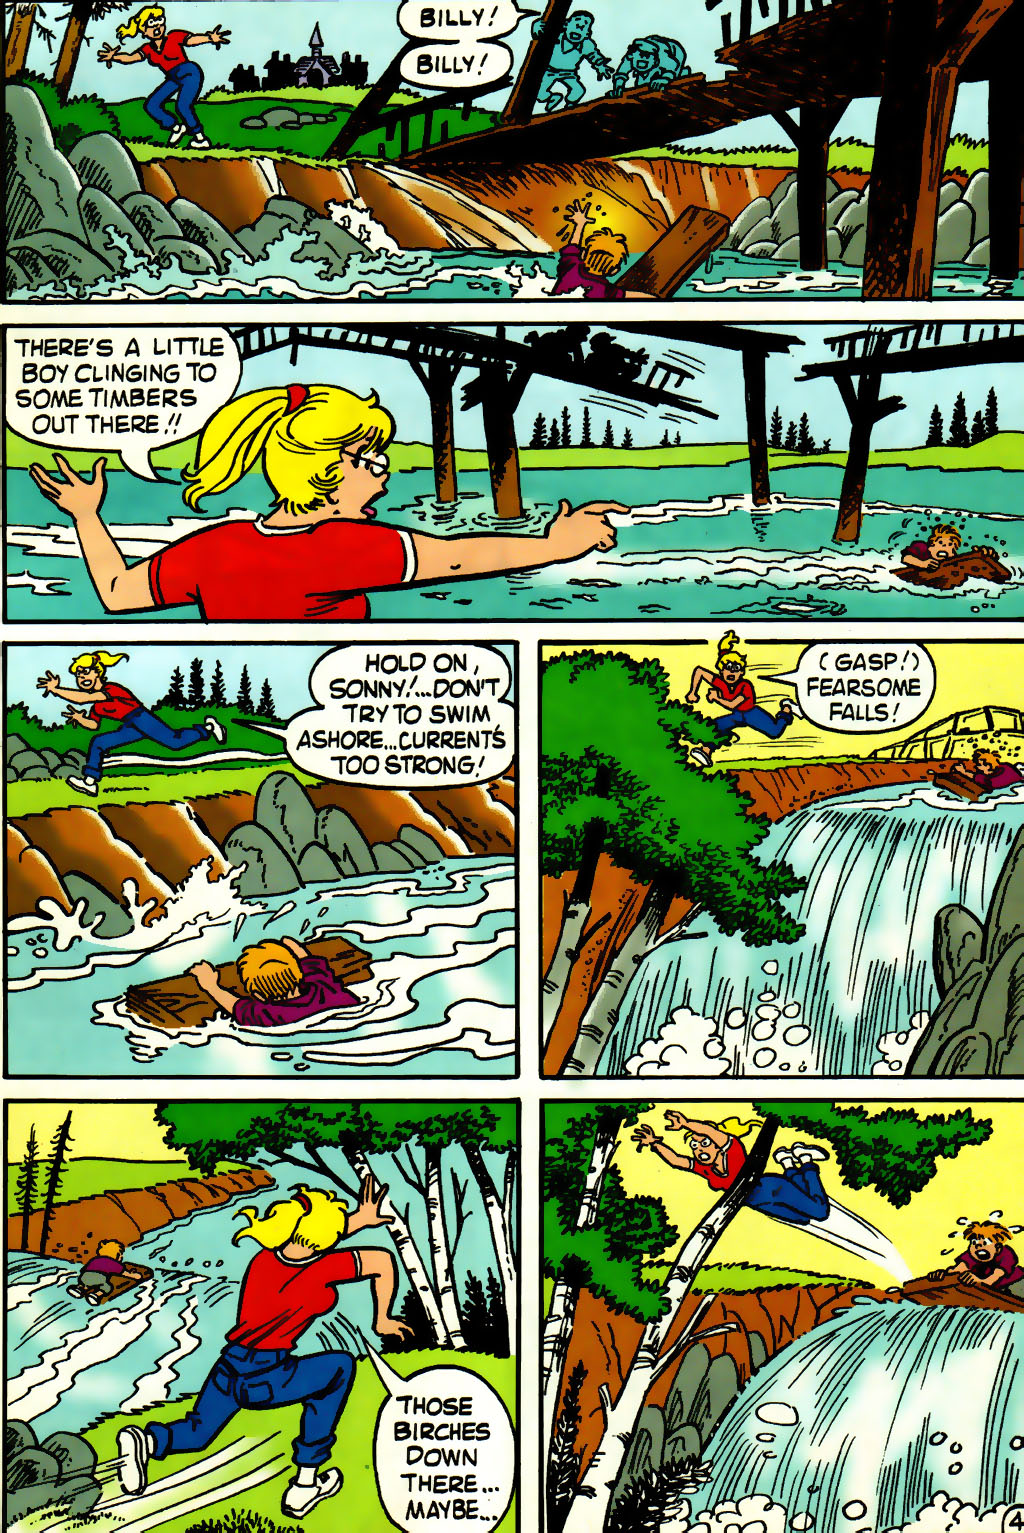 Read online Betty comic -  Issue #61 - 5